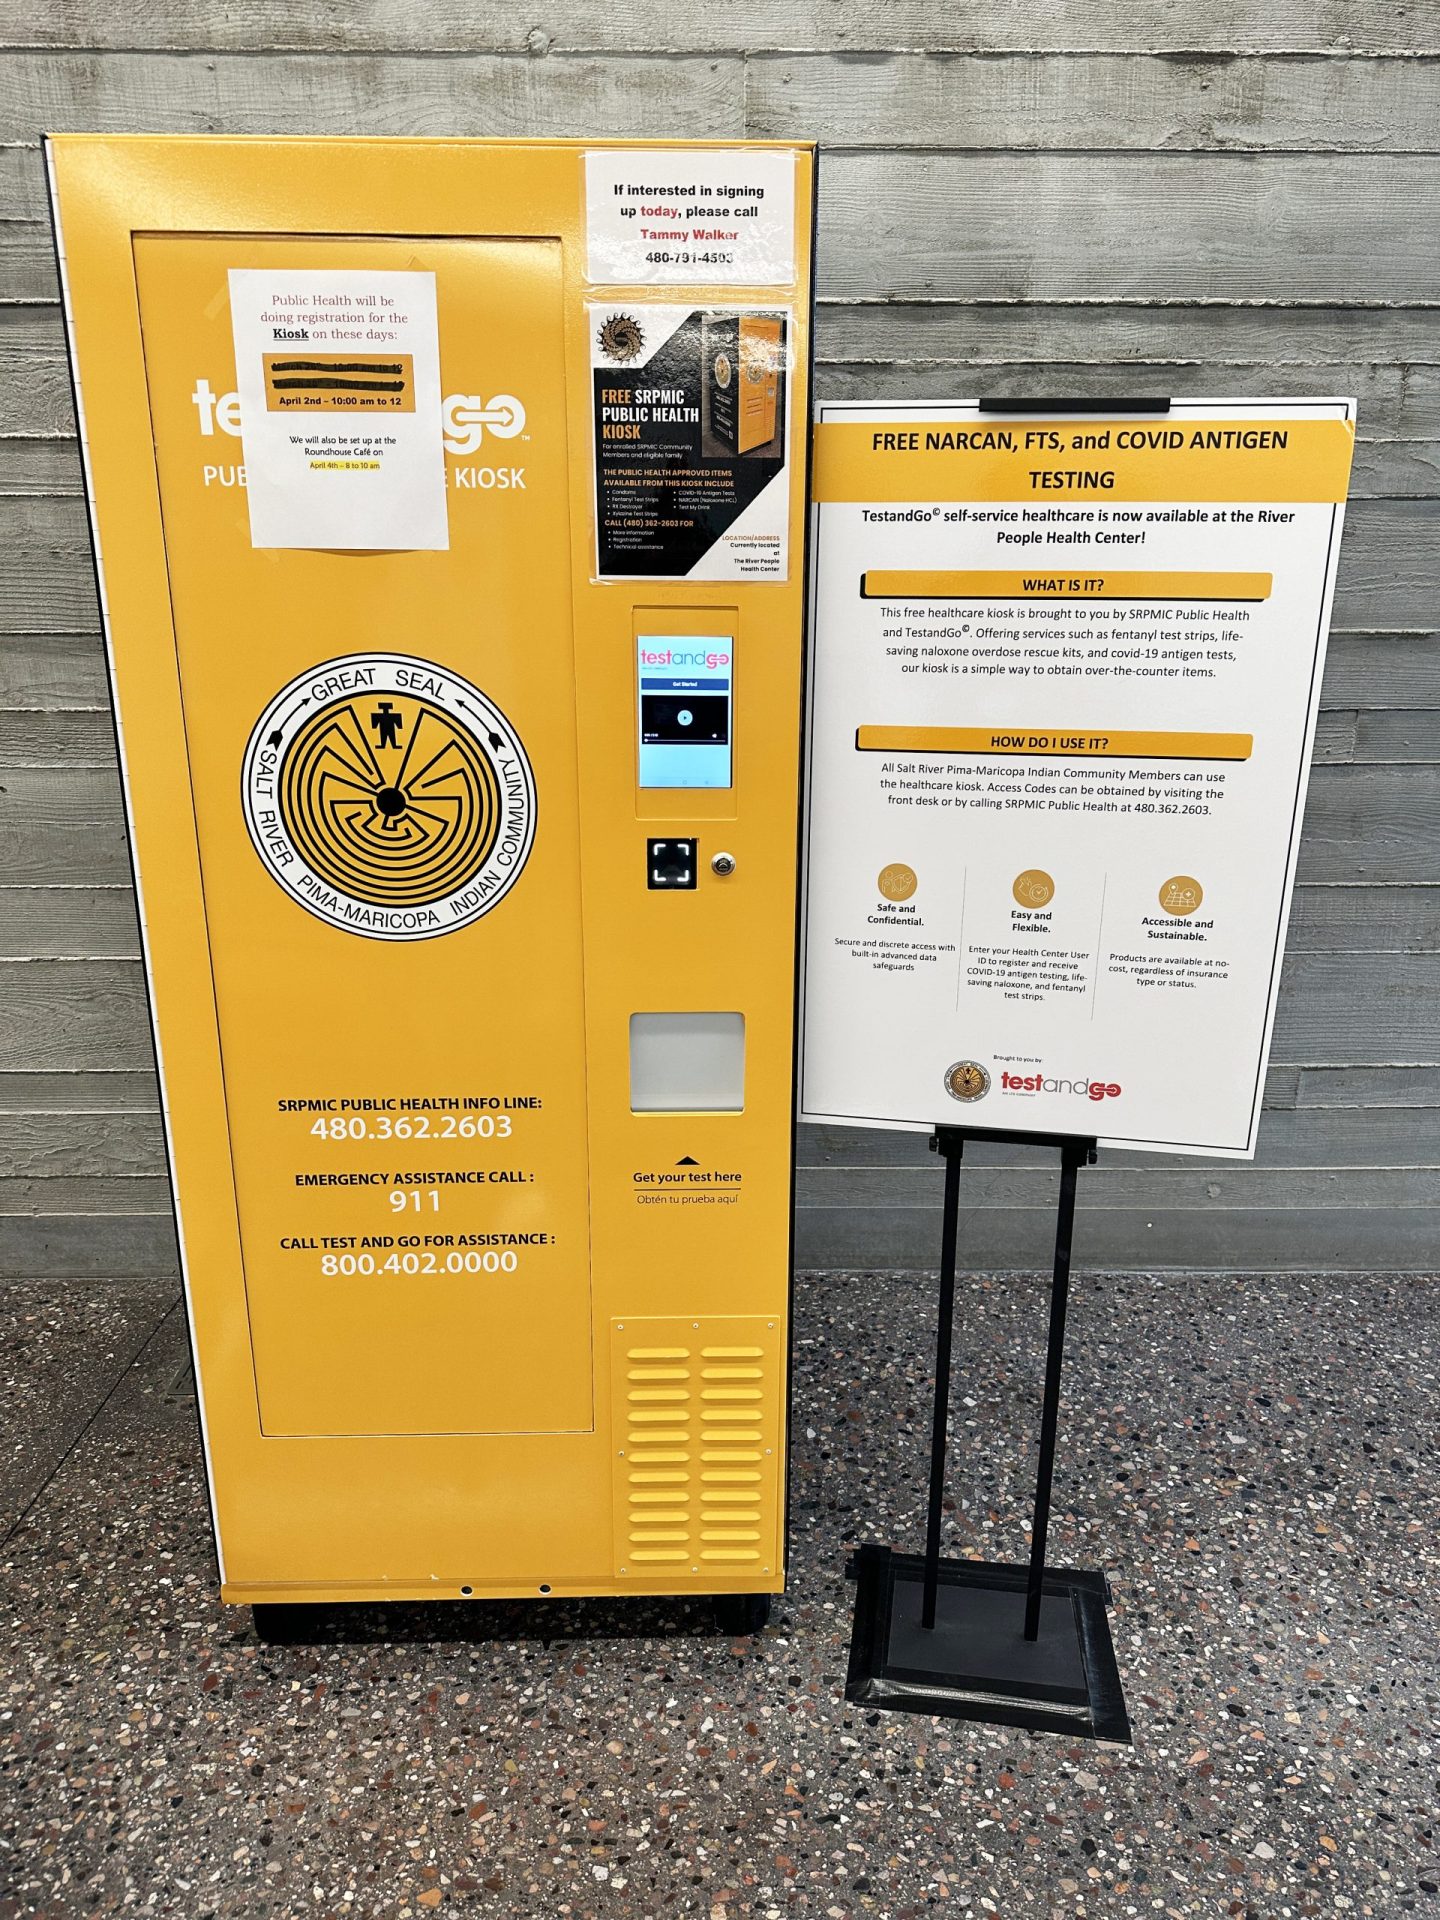 Free Public Health Kiosk Ready for Use at River People Health Center